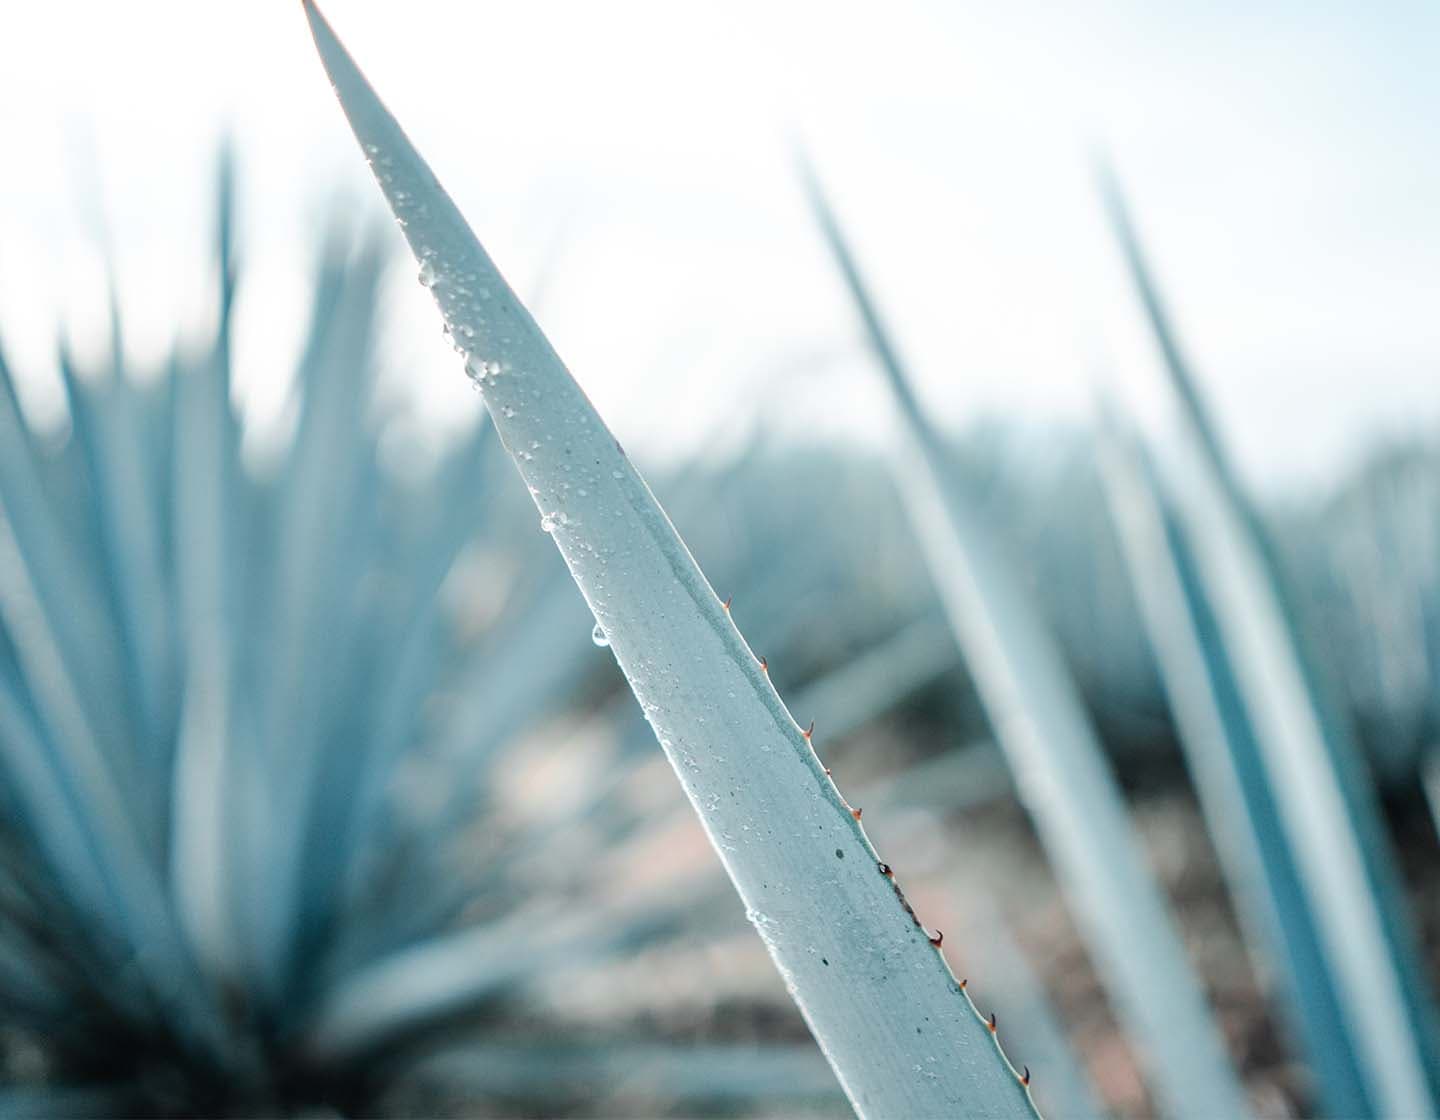 A close-up shot of an agave plant with a water drop running down one of the spiked leaves